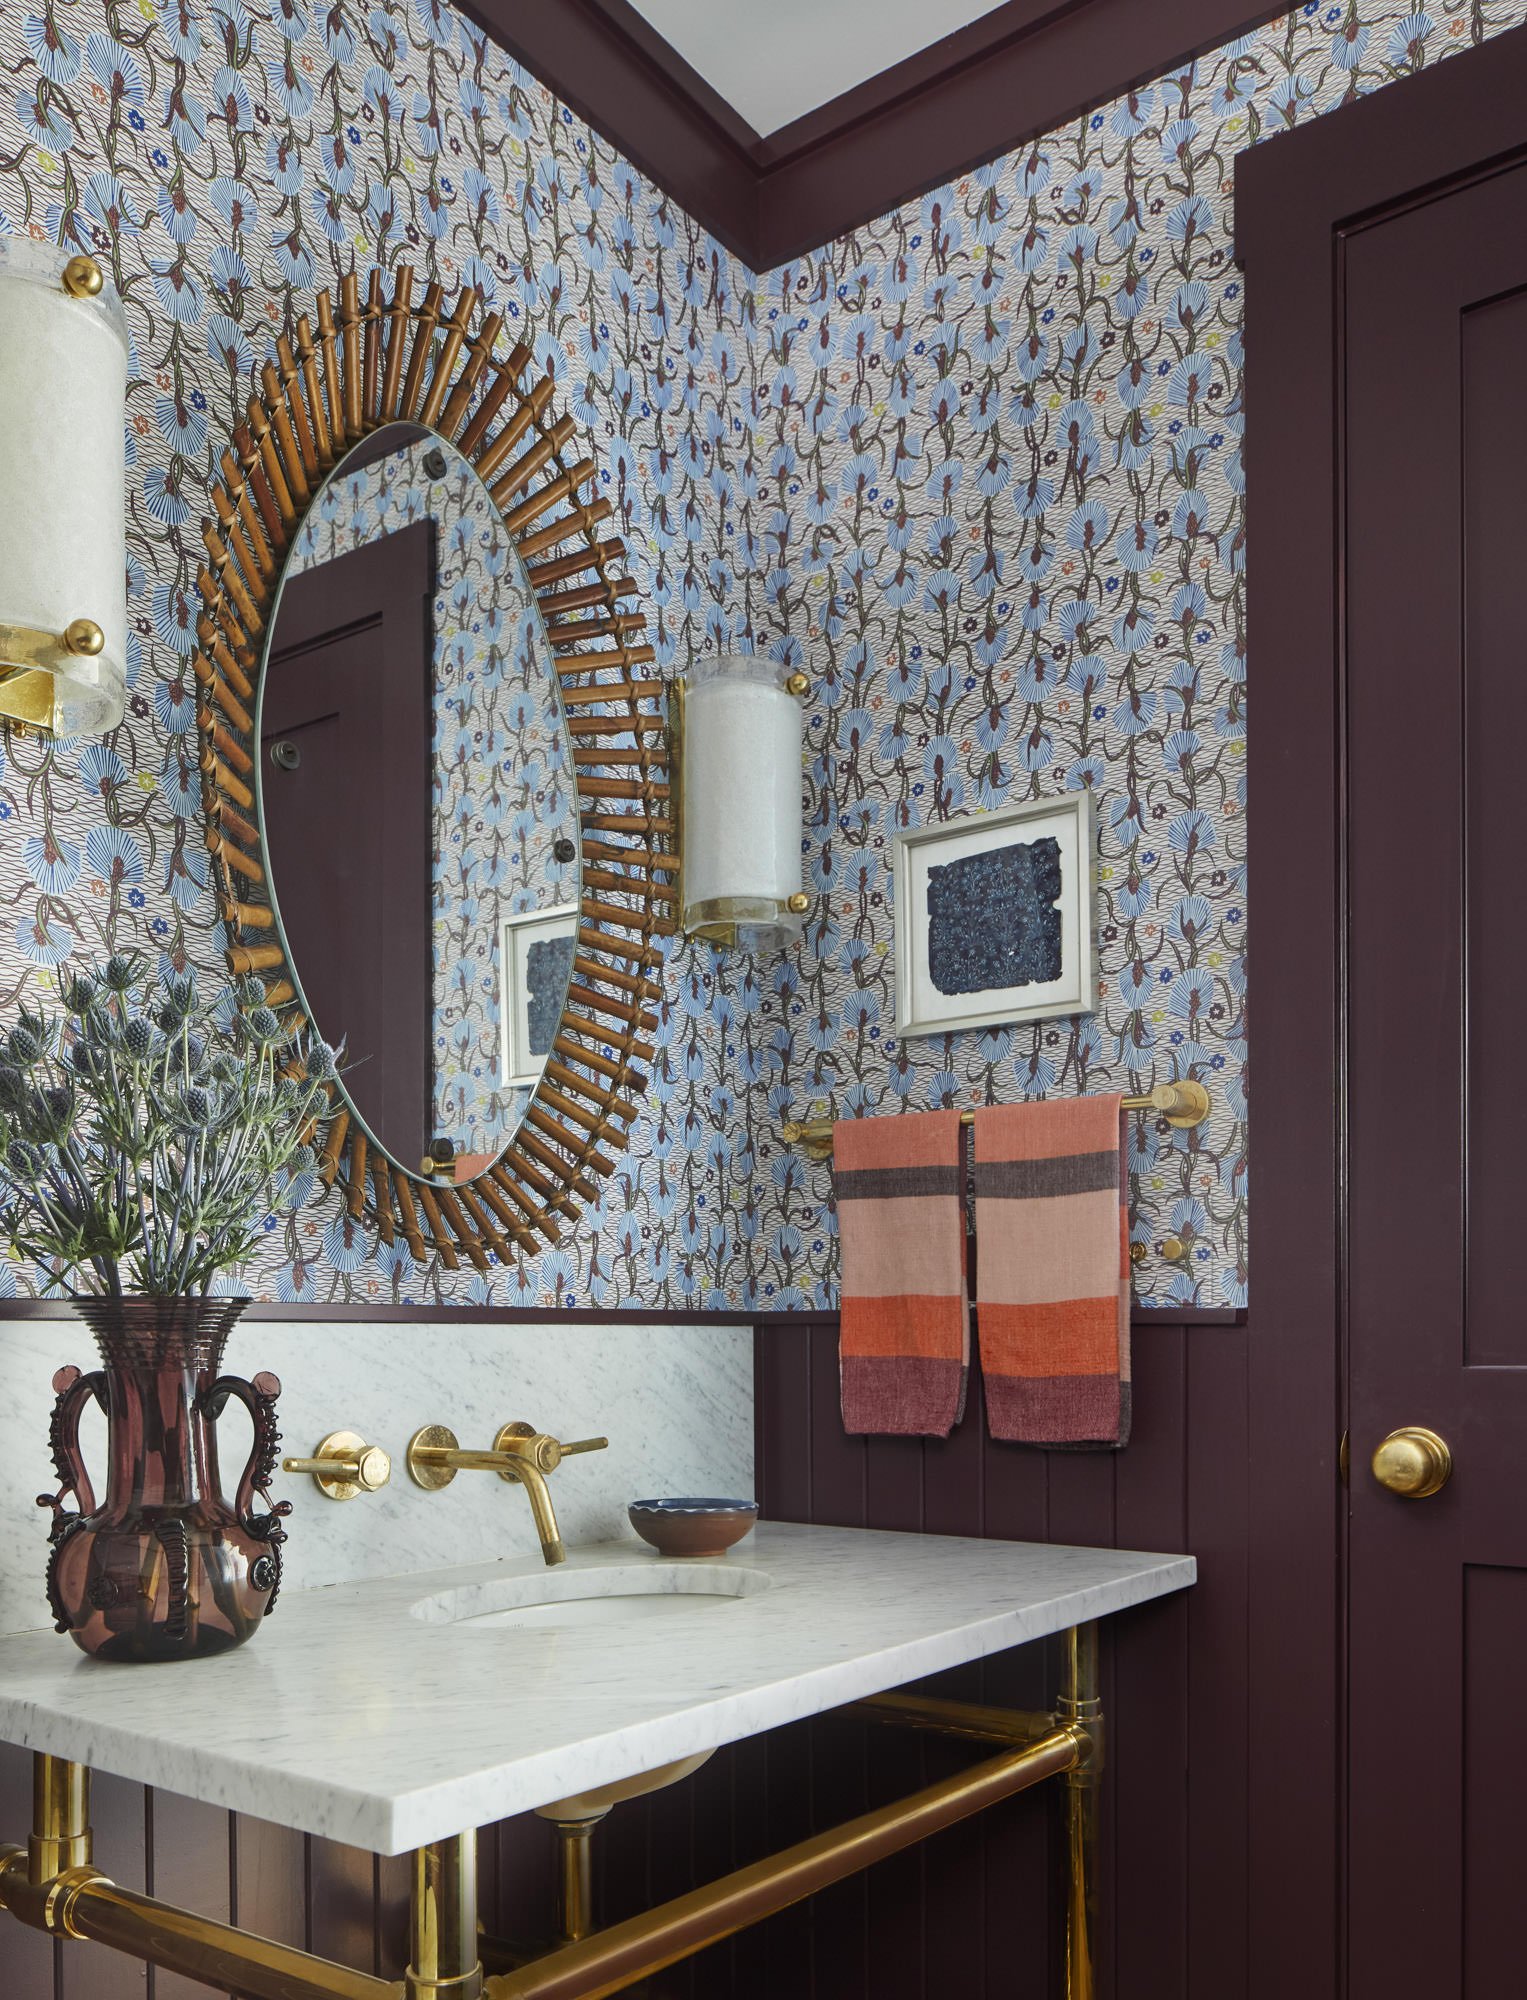   IN THE POWDER ROOM, A CUSTOM BRASS WASHSTAND AND CARRARA MARBLE COUNTERTOP OFFSETS WALLPAPER FROM PIERRE FREY AND A VINTAGE SCULPTURAL BAMBOO MIRROR FLANKED BY A PAIR OF VINTAGE MURANO GLASS SCONCES.  